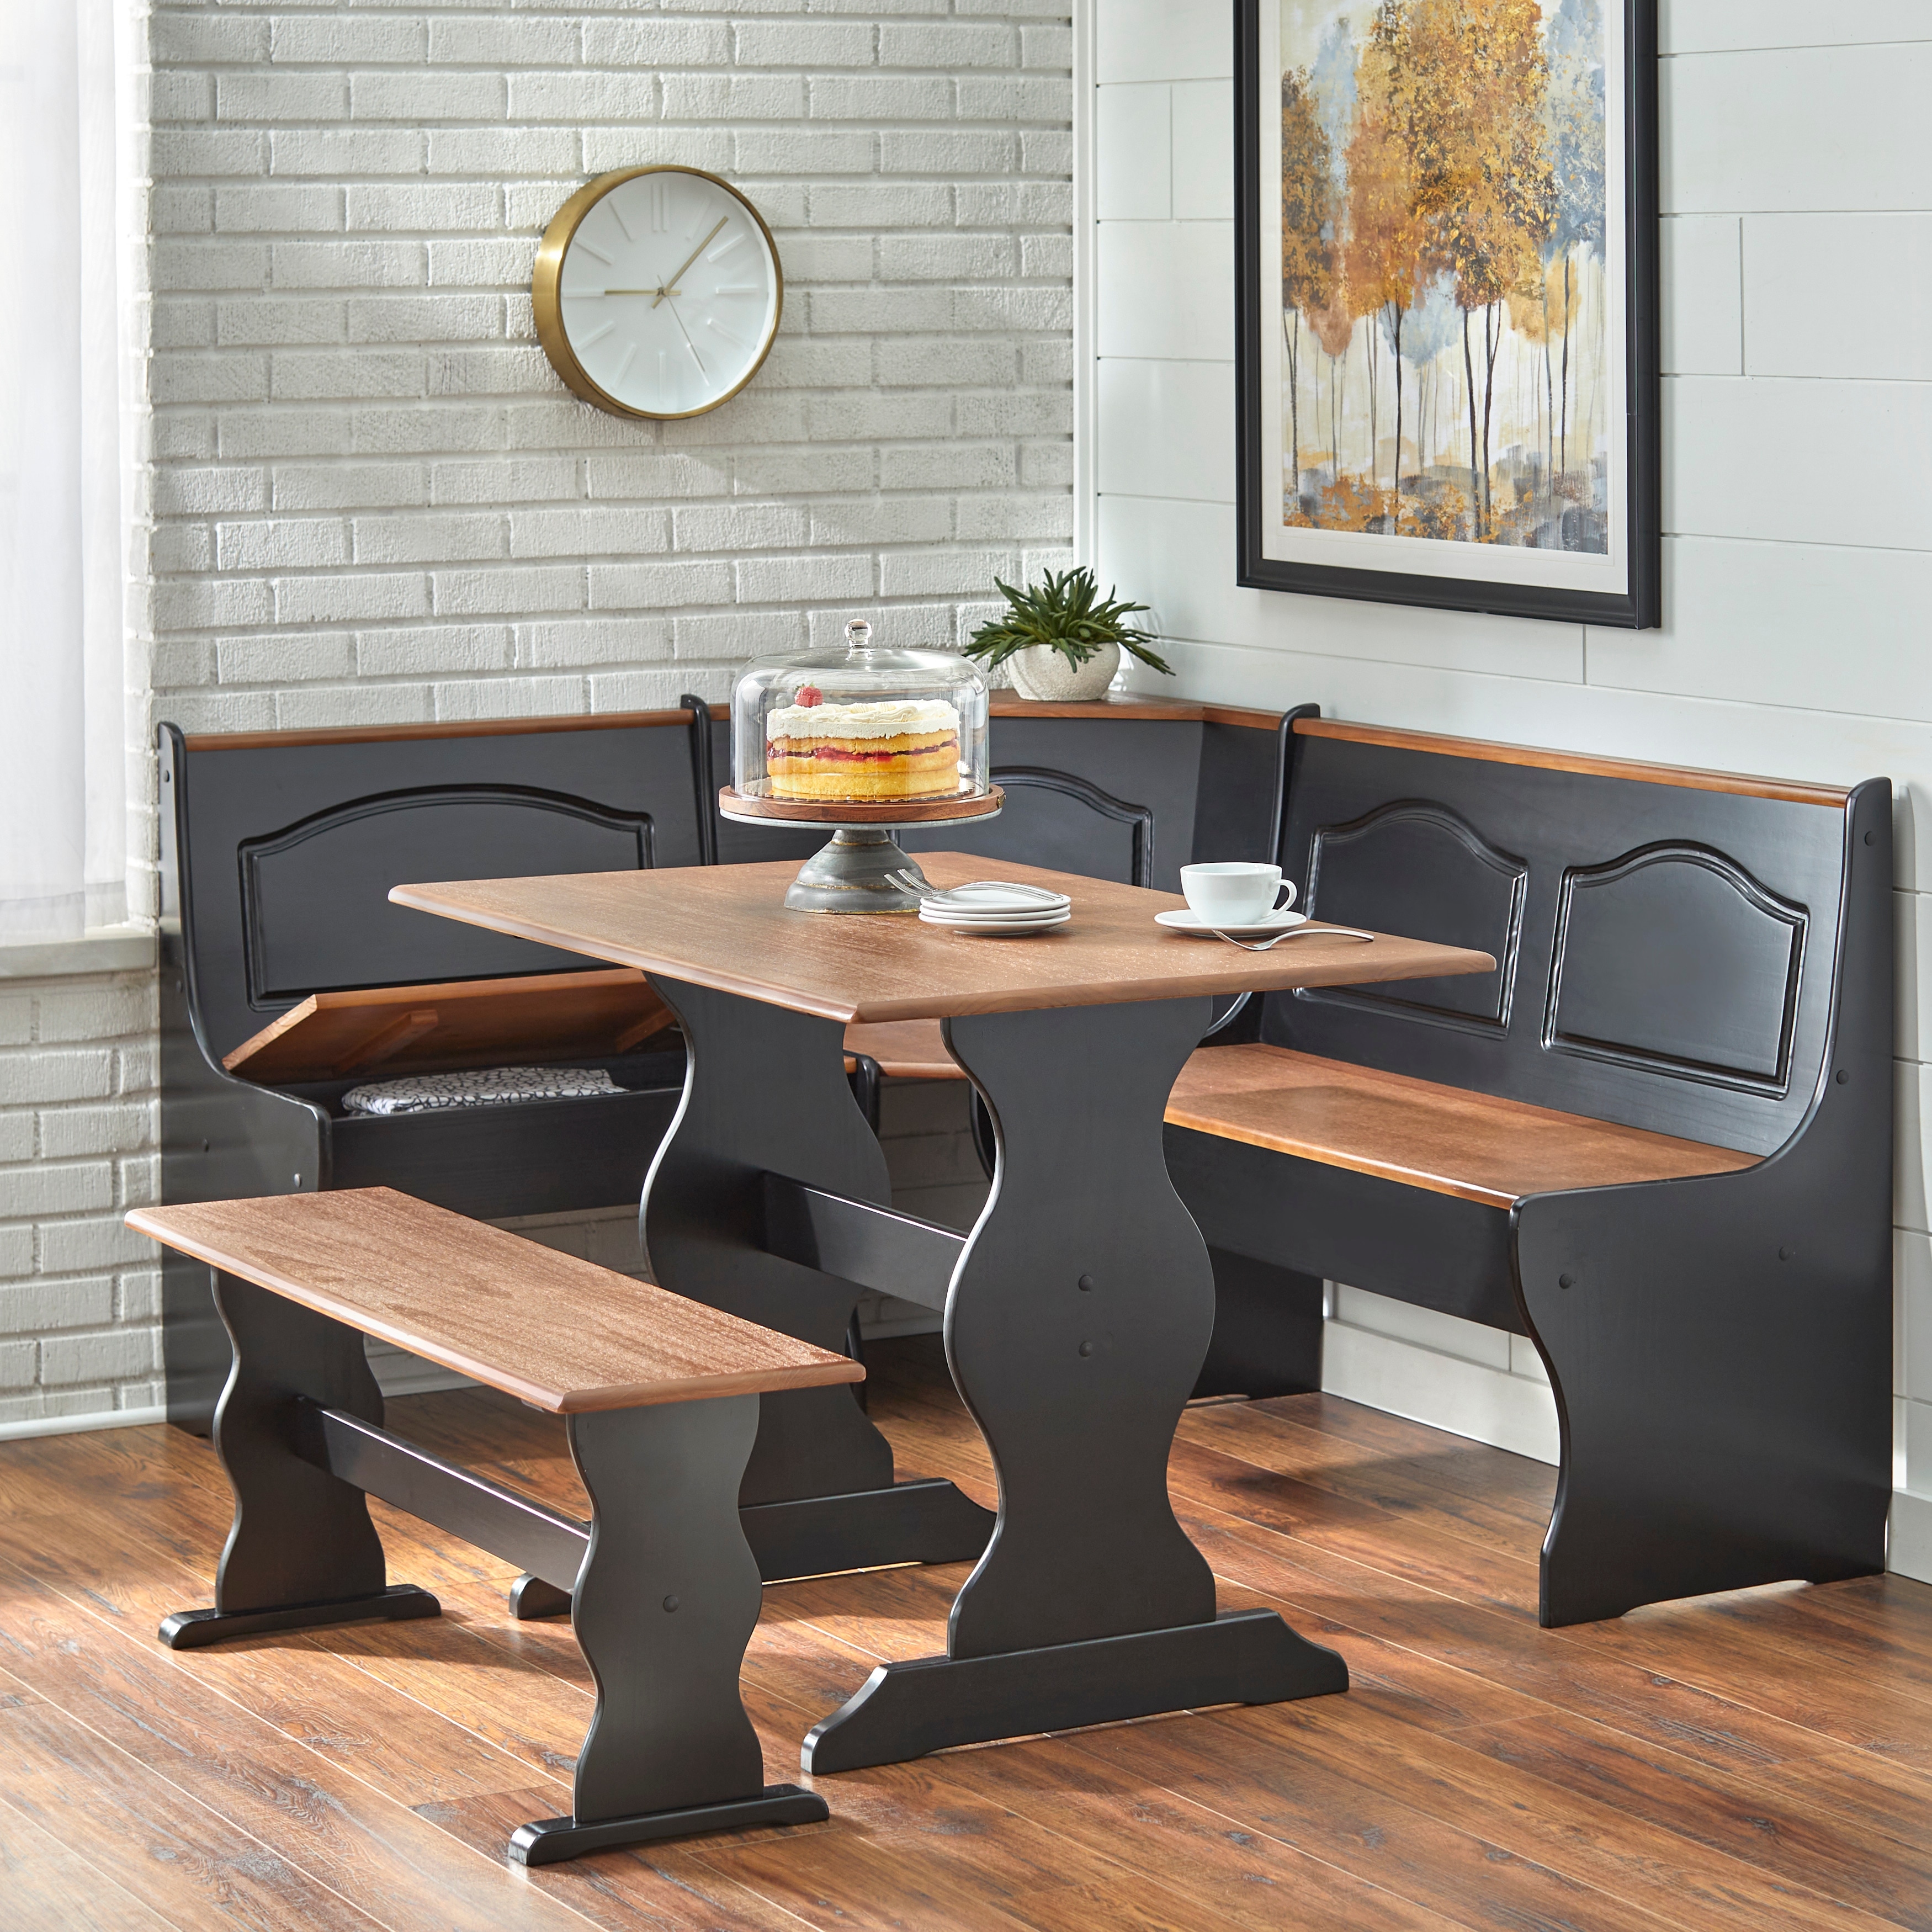 https://ak1.ostkcdn.com/images/products/is/images/direct/21a2fb2008cc8b17a0ce9afd76bd1777e567d844/Simple-Living-Knox-Nook-3-piece-Dining-Set.jpg